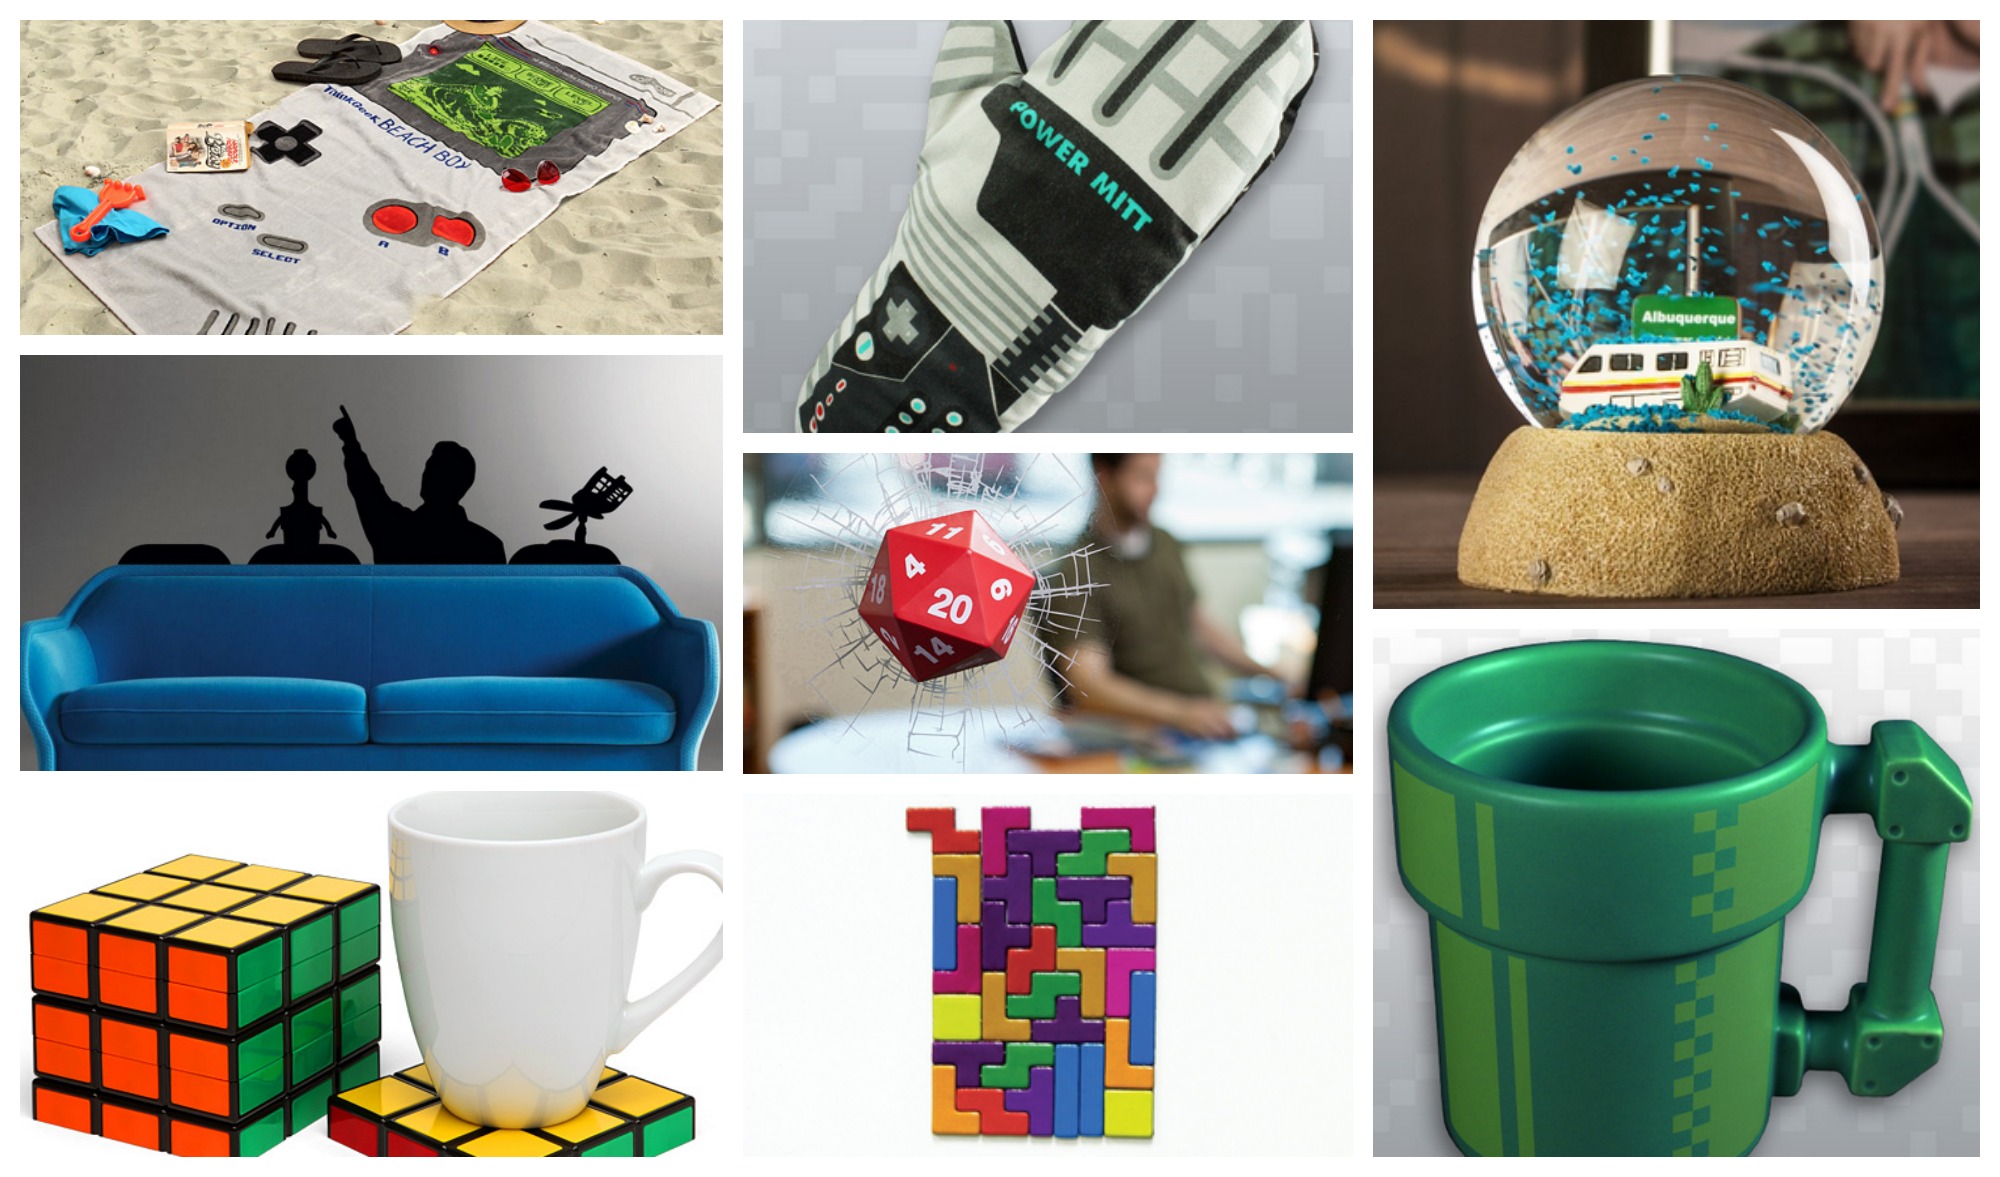 Geek Gift Guide / Geeky Holiday gift ideas